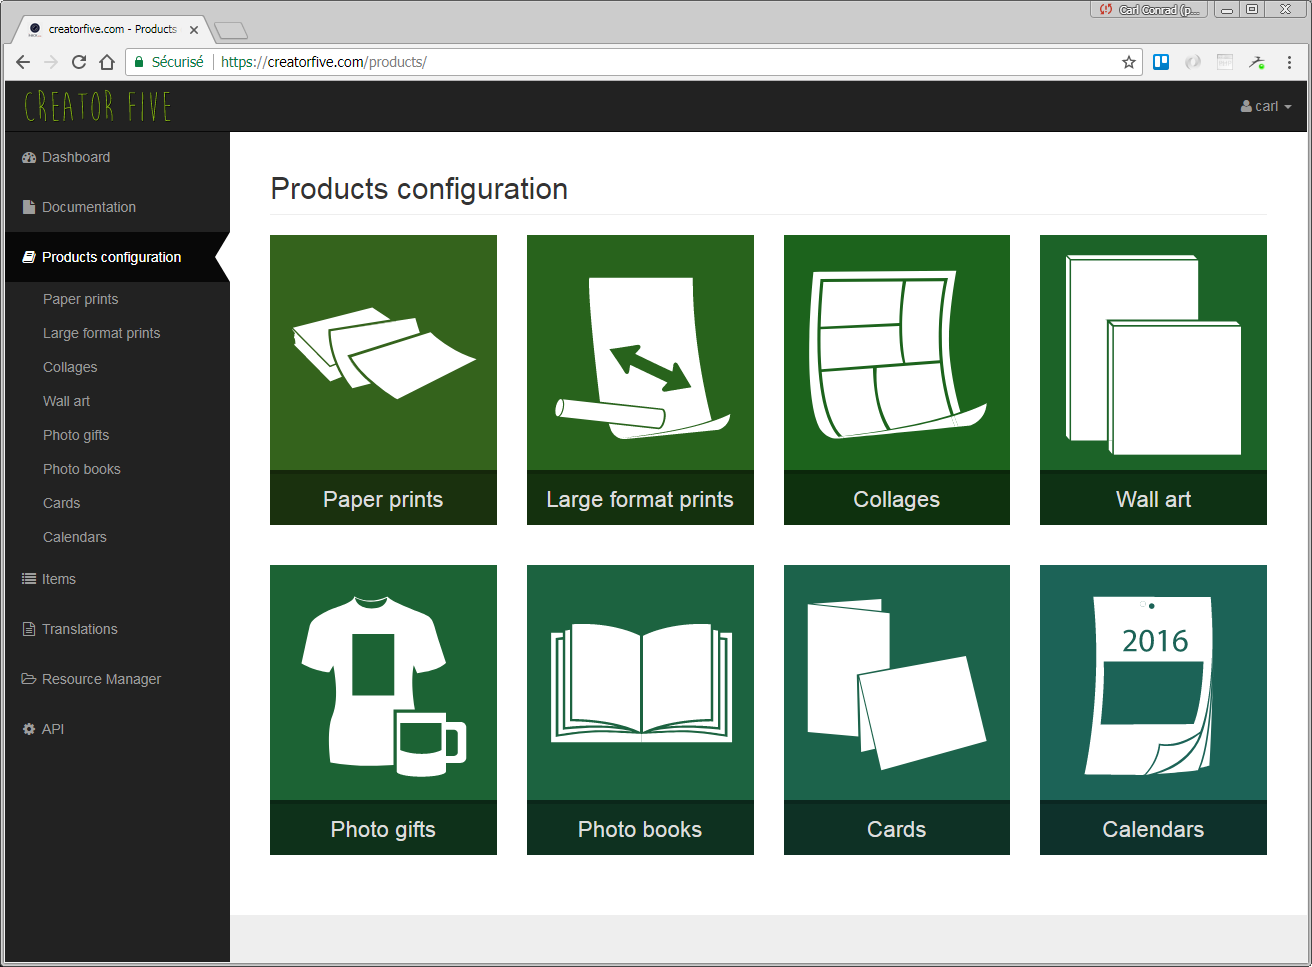 Product configuration screen